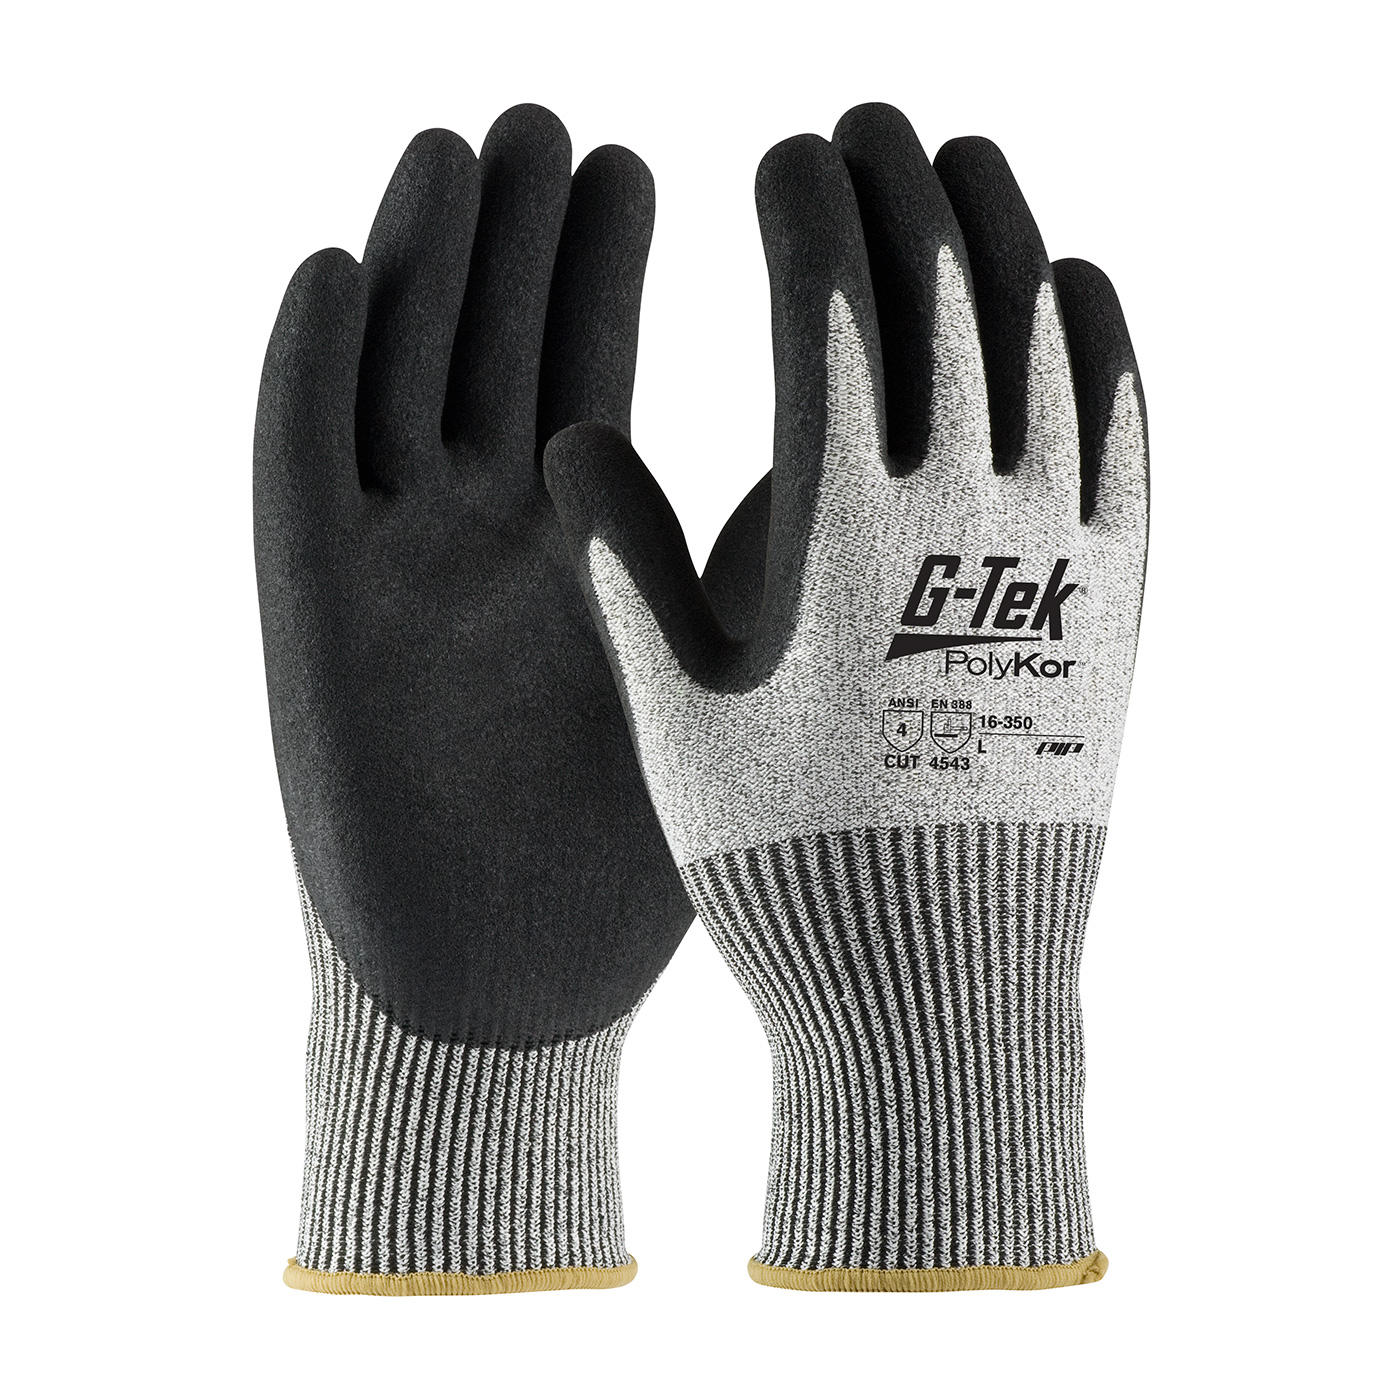 PIP 16-350/XL G-Tek PolyKor Seamless Knit PolyKor Blended Glove with Double-Dipped Nitrile Coated MicroSurface Grip on Palm & Fingers - X-Large PID-16 350 XL